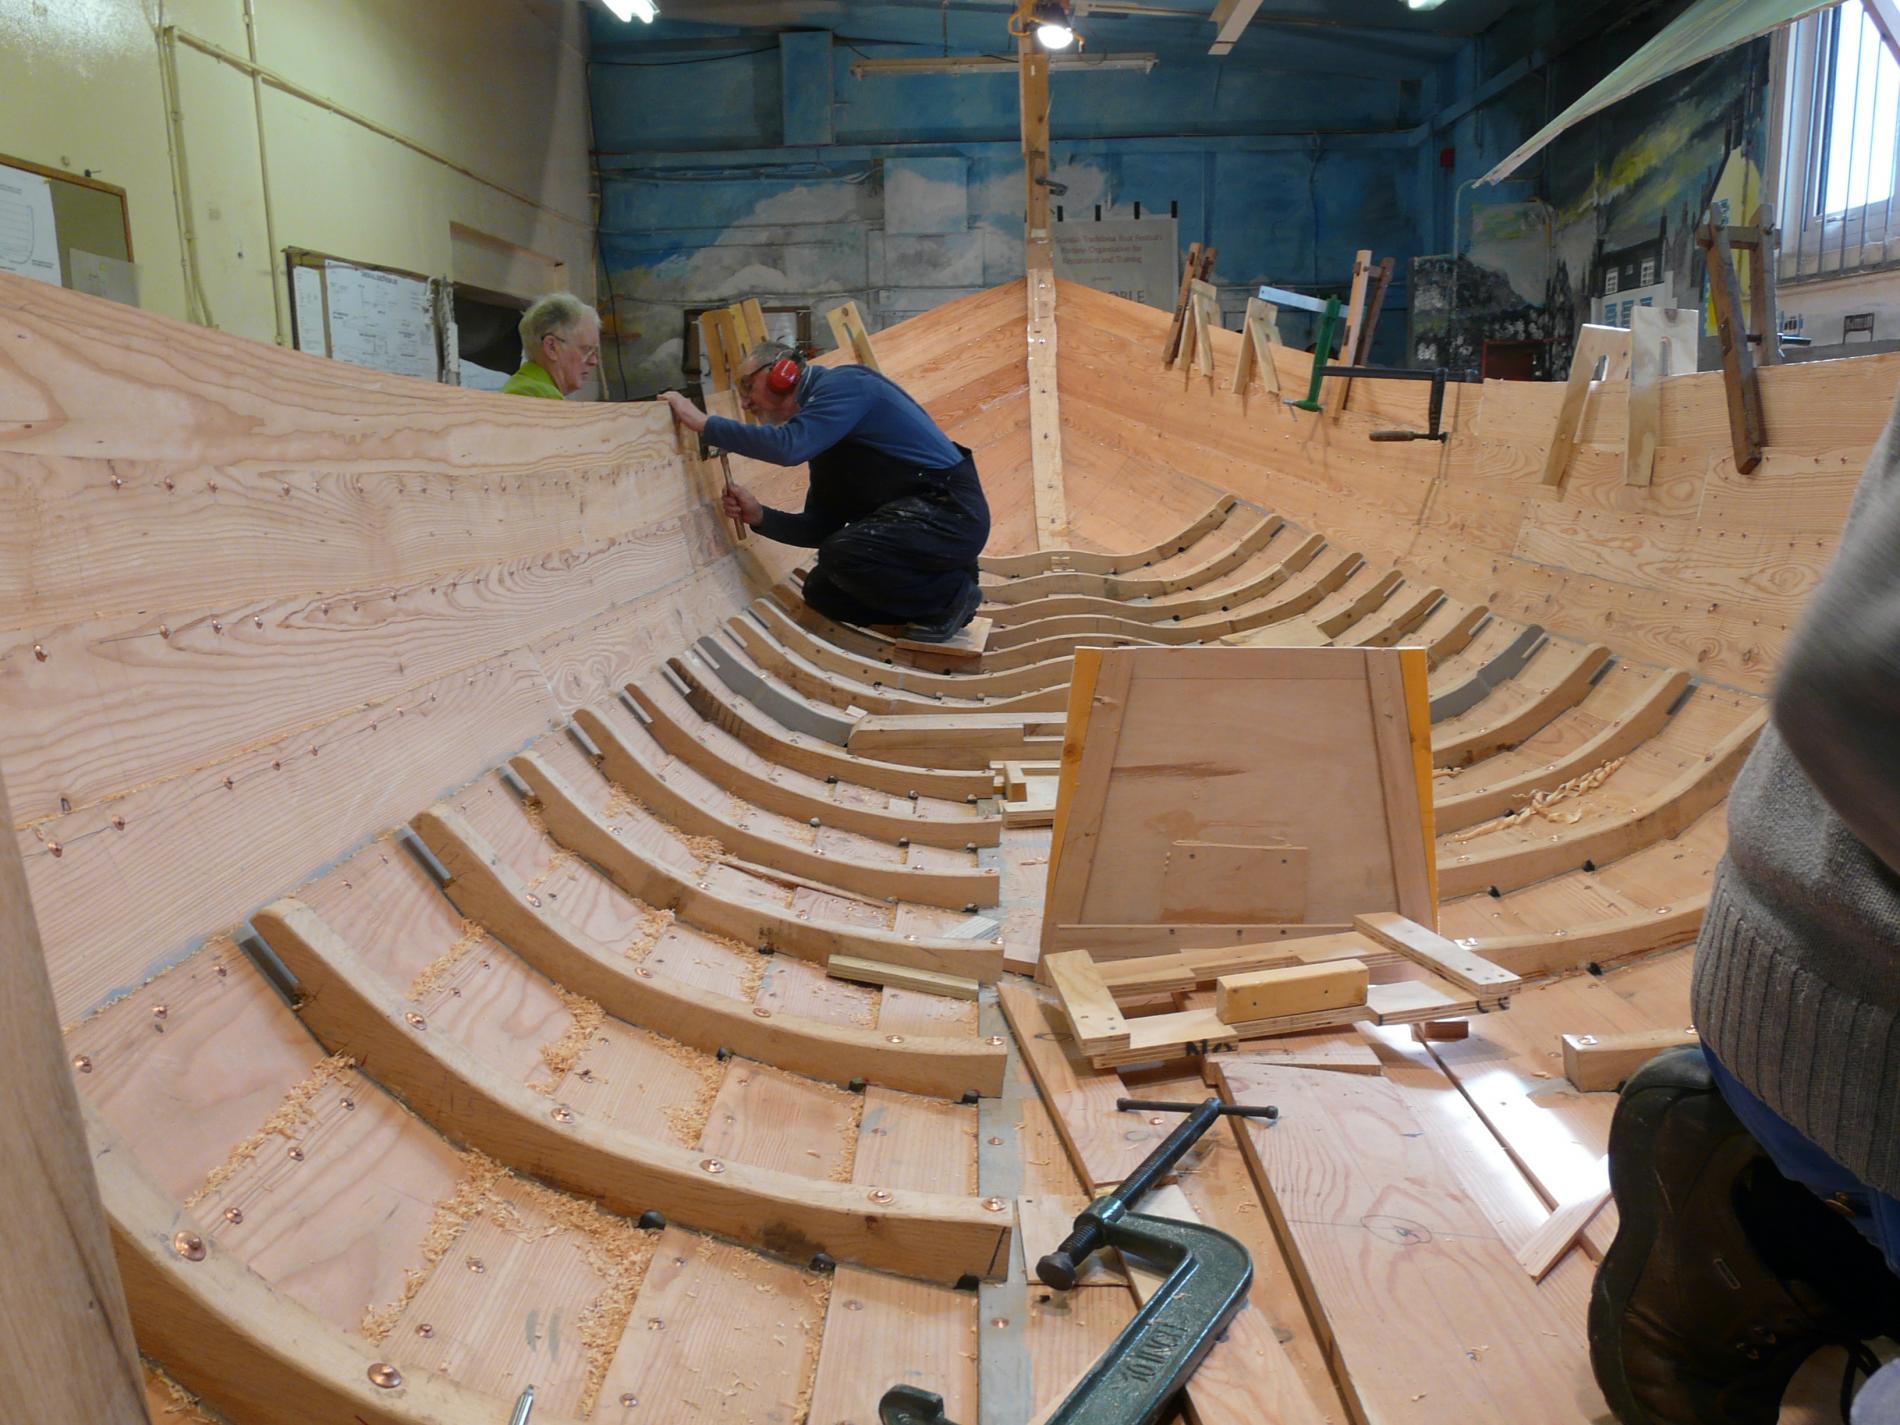 traditional kayak building comes to scotland - unsponsored